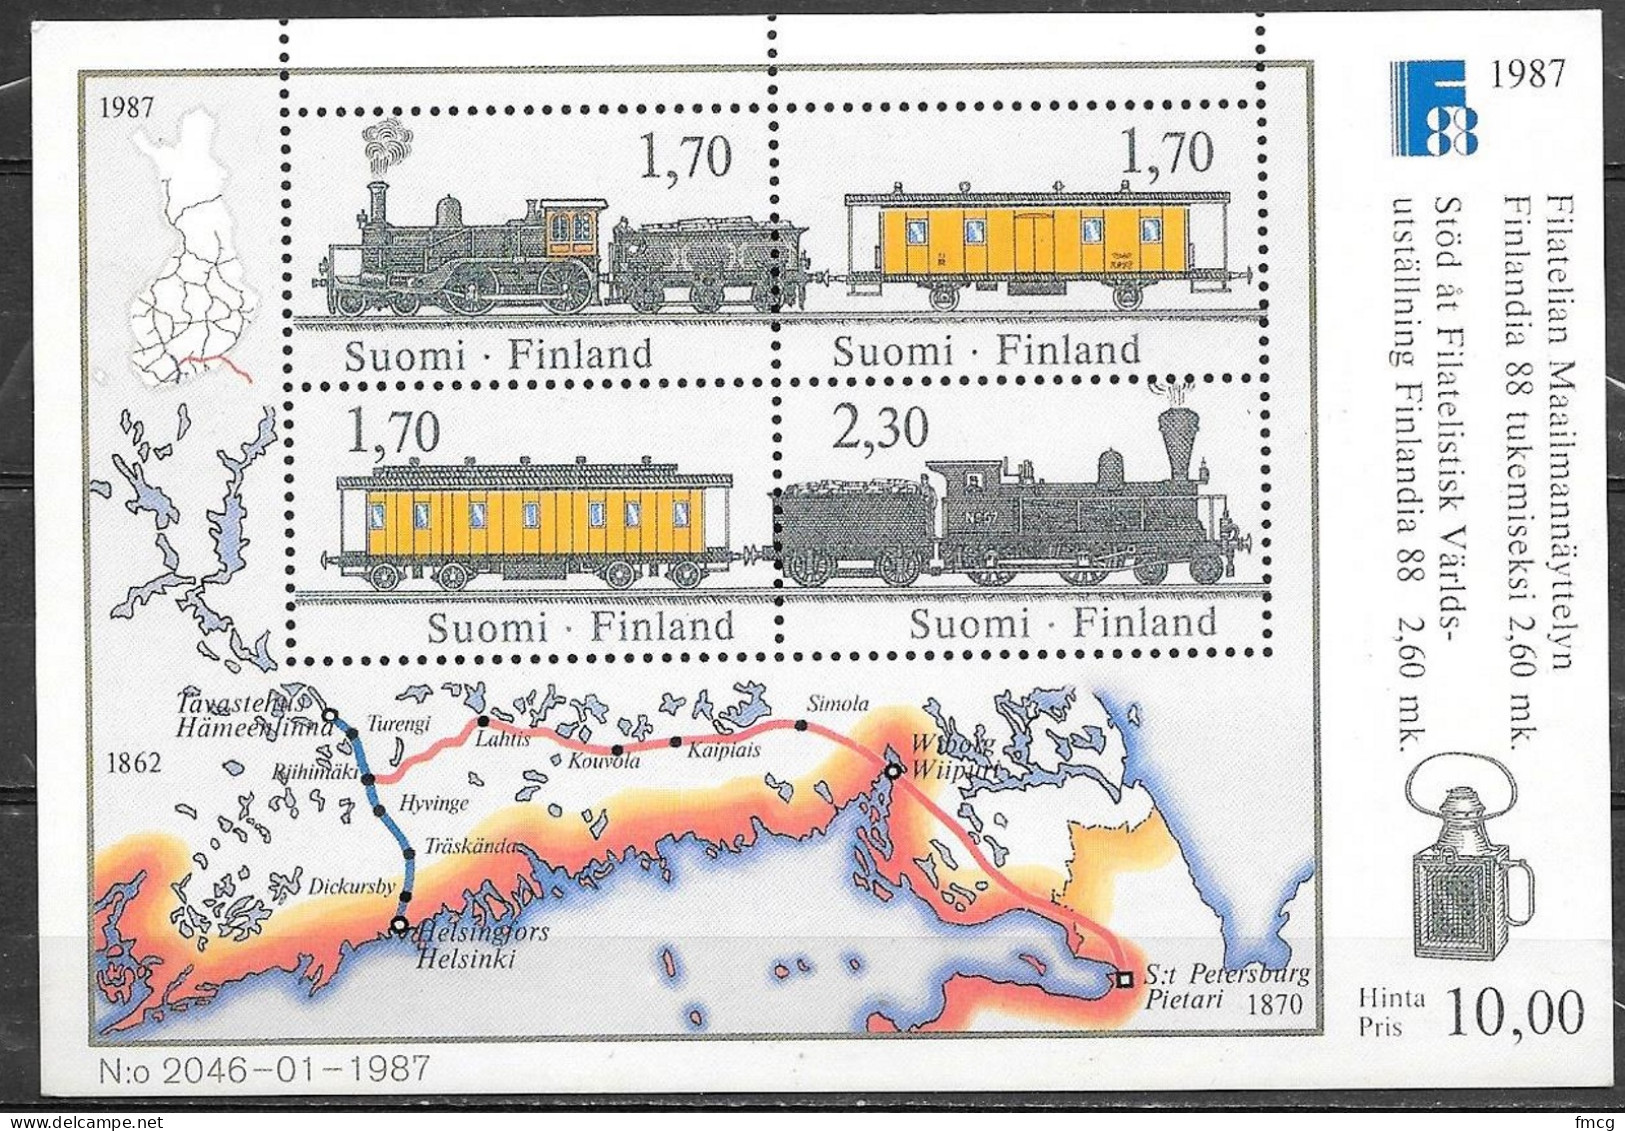 Finland, Stamps, Finlandia 1987, Unused - Stamps (pictures)